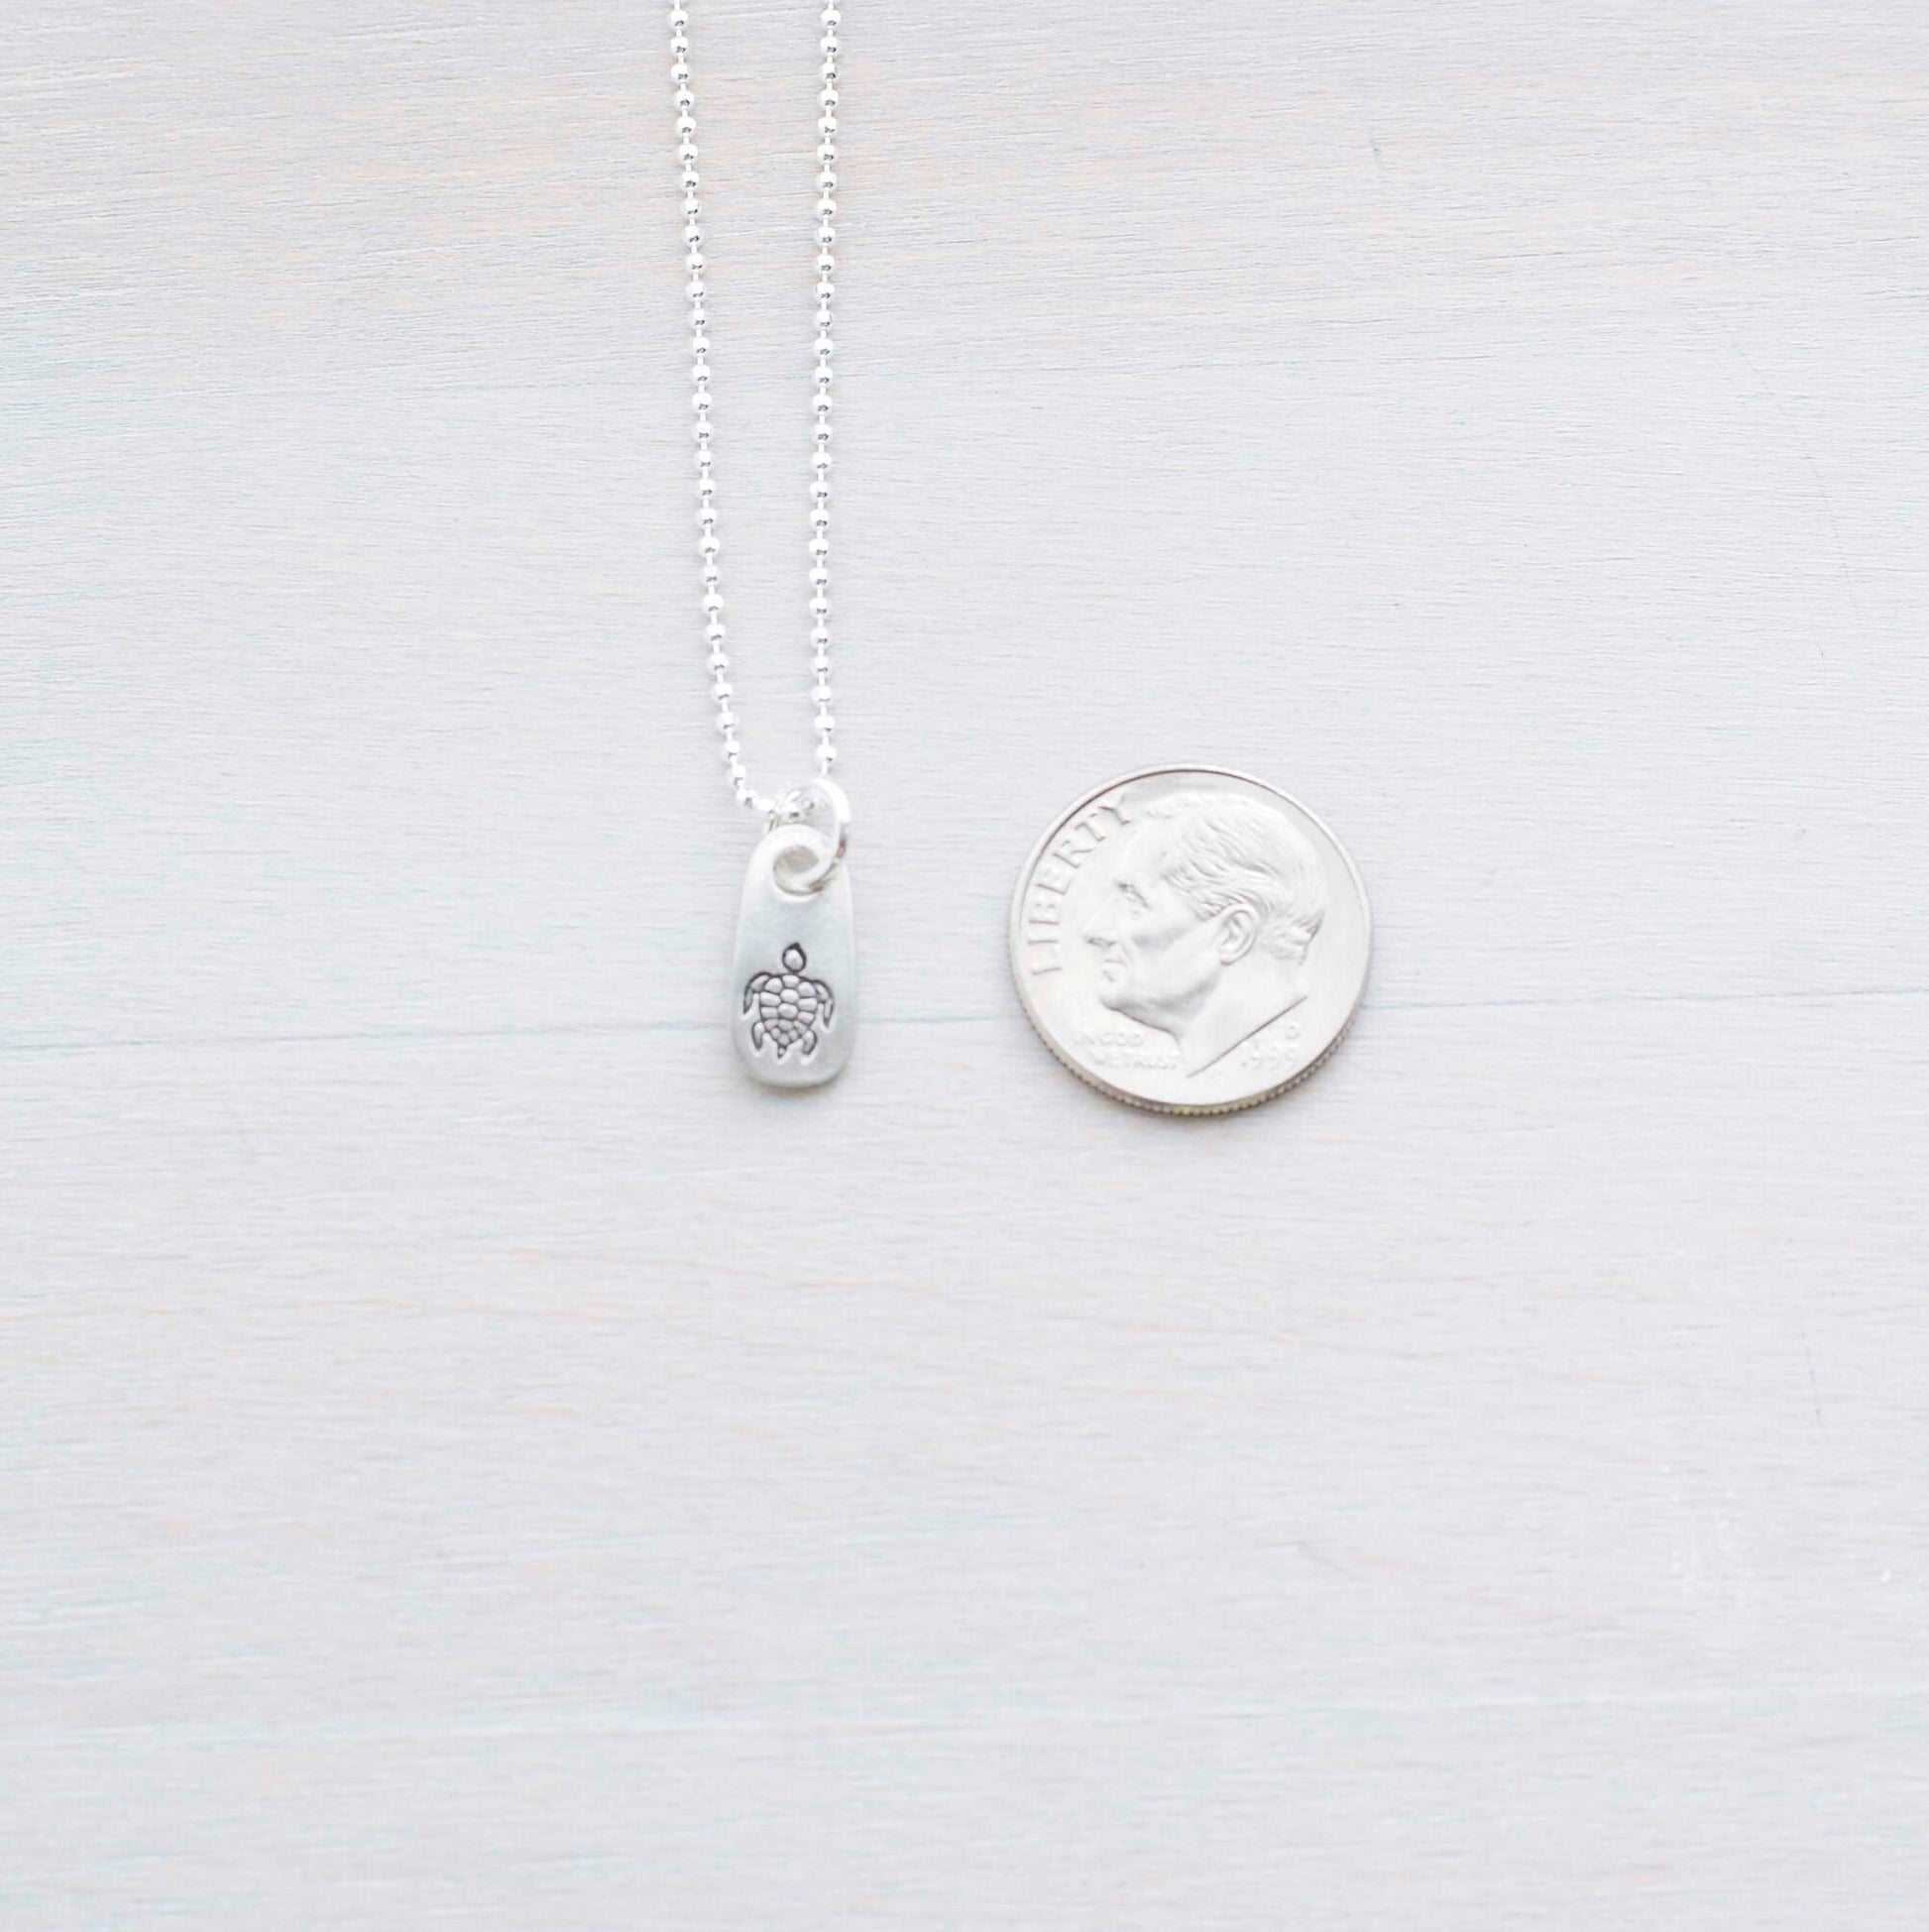 Silver sea turtle necklace in artisan pewter next to a dime